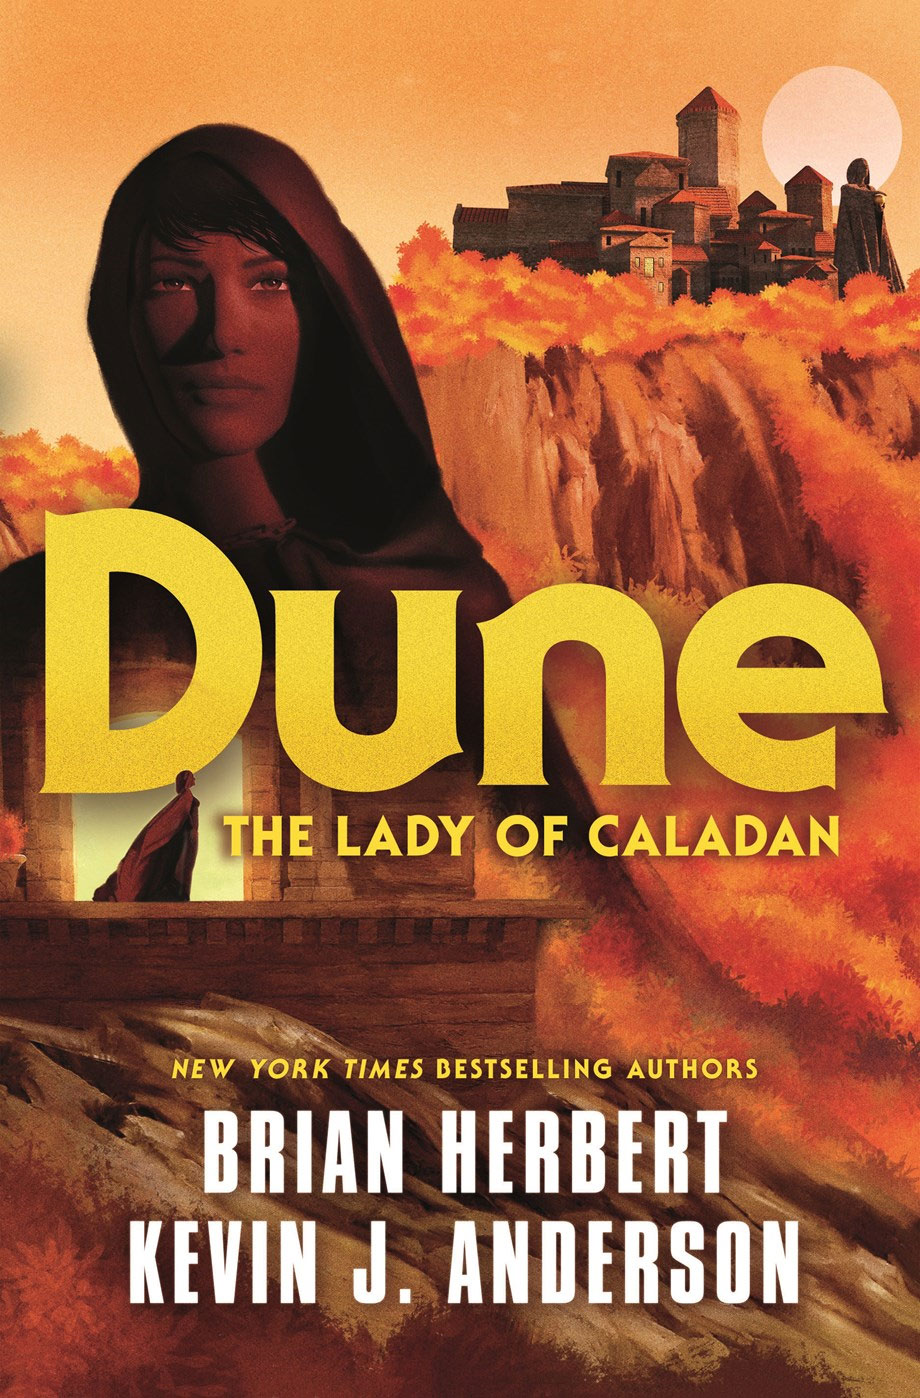 Matt Griffin's cover for 'Dune: The Lady of Caladan', second book in 'The Caladan Trilogy' by Brian Herbert and Kevin J. Anderson.